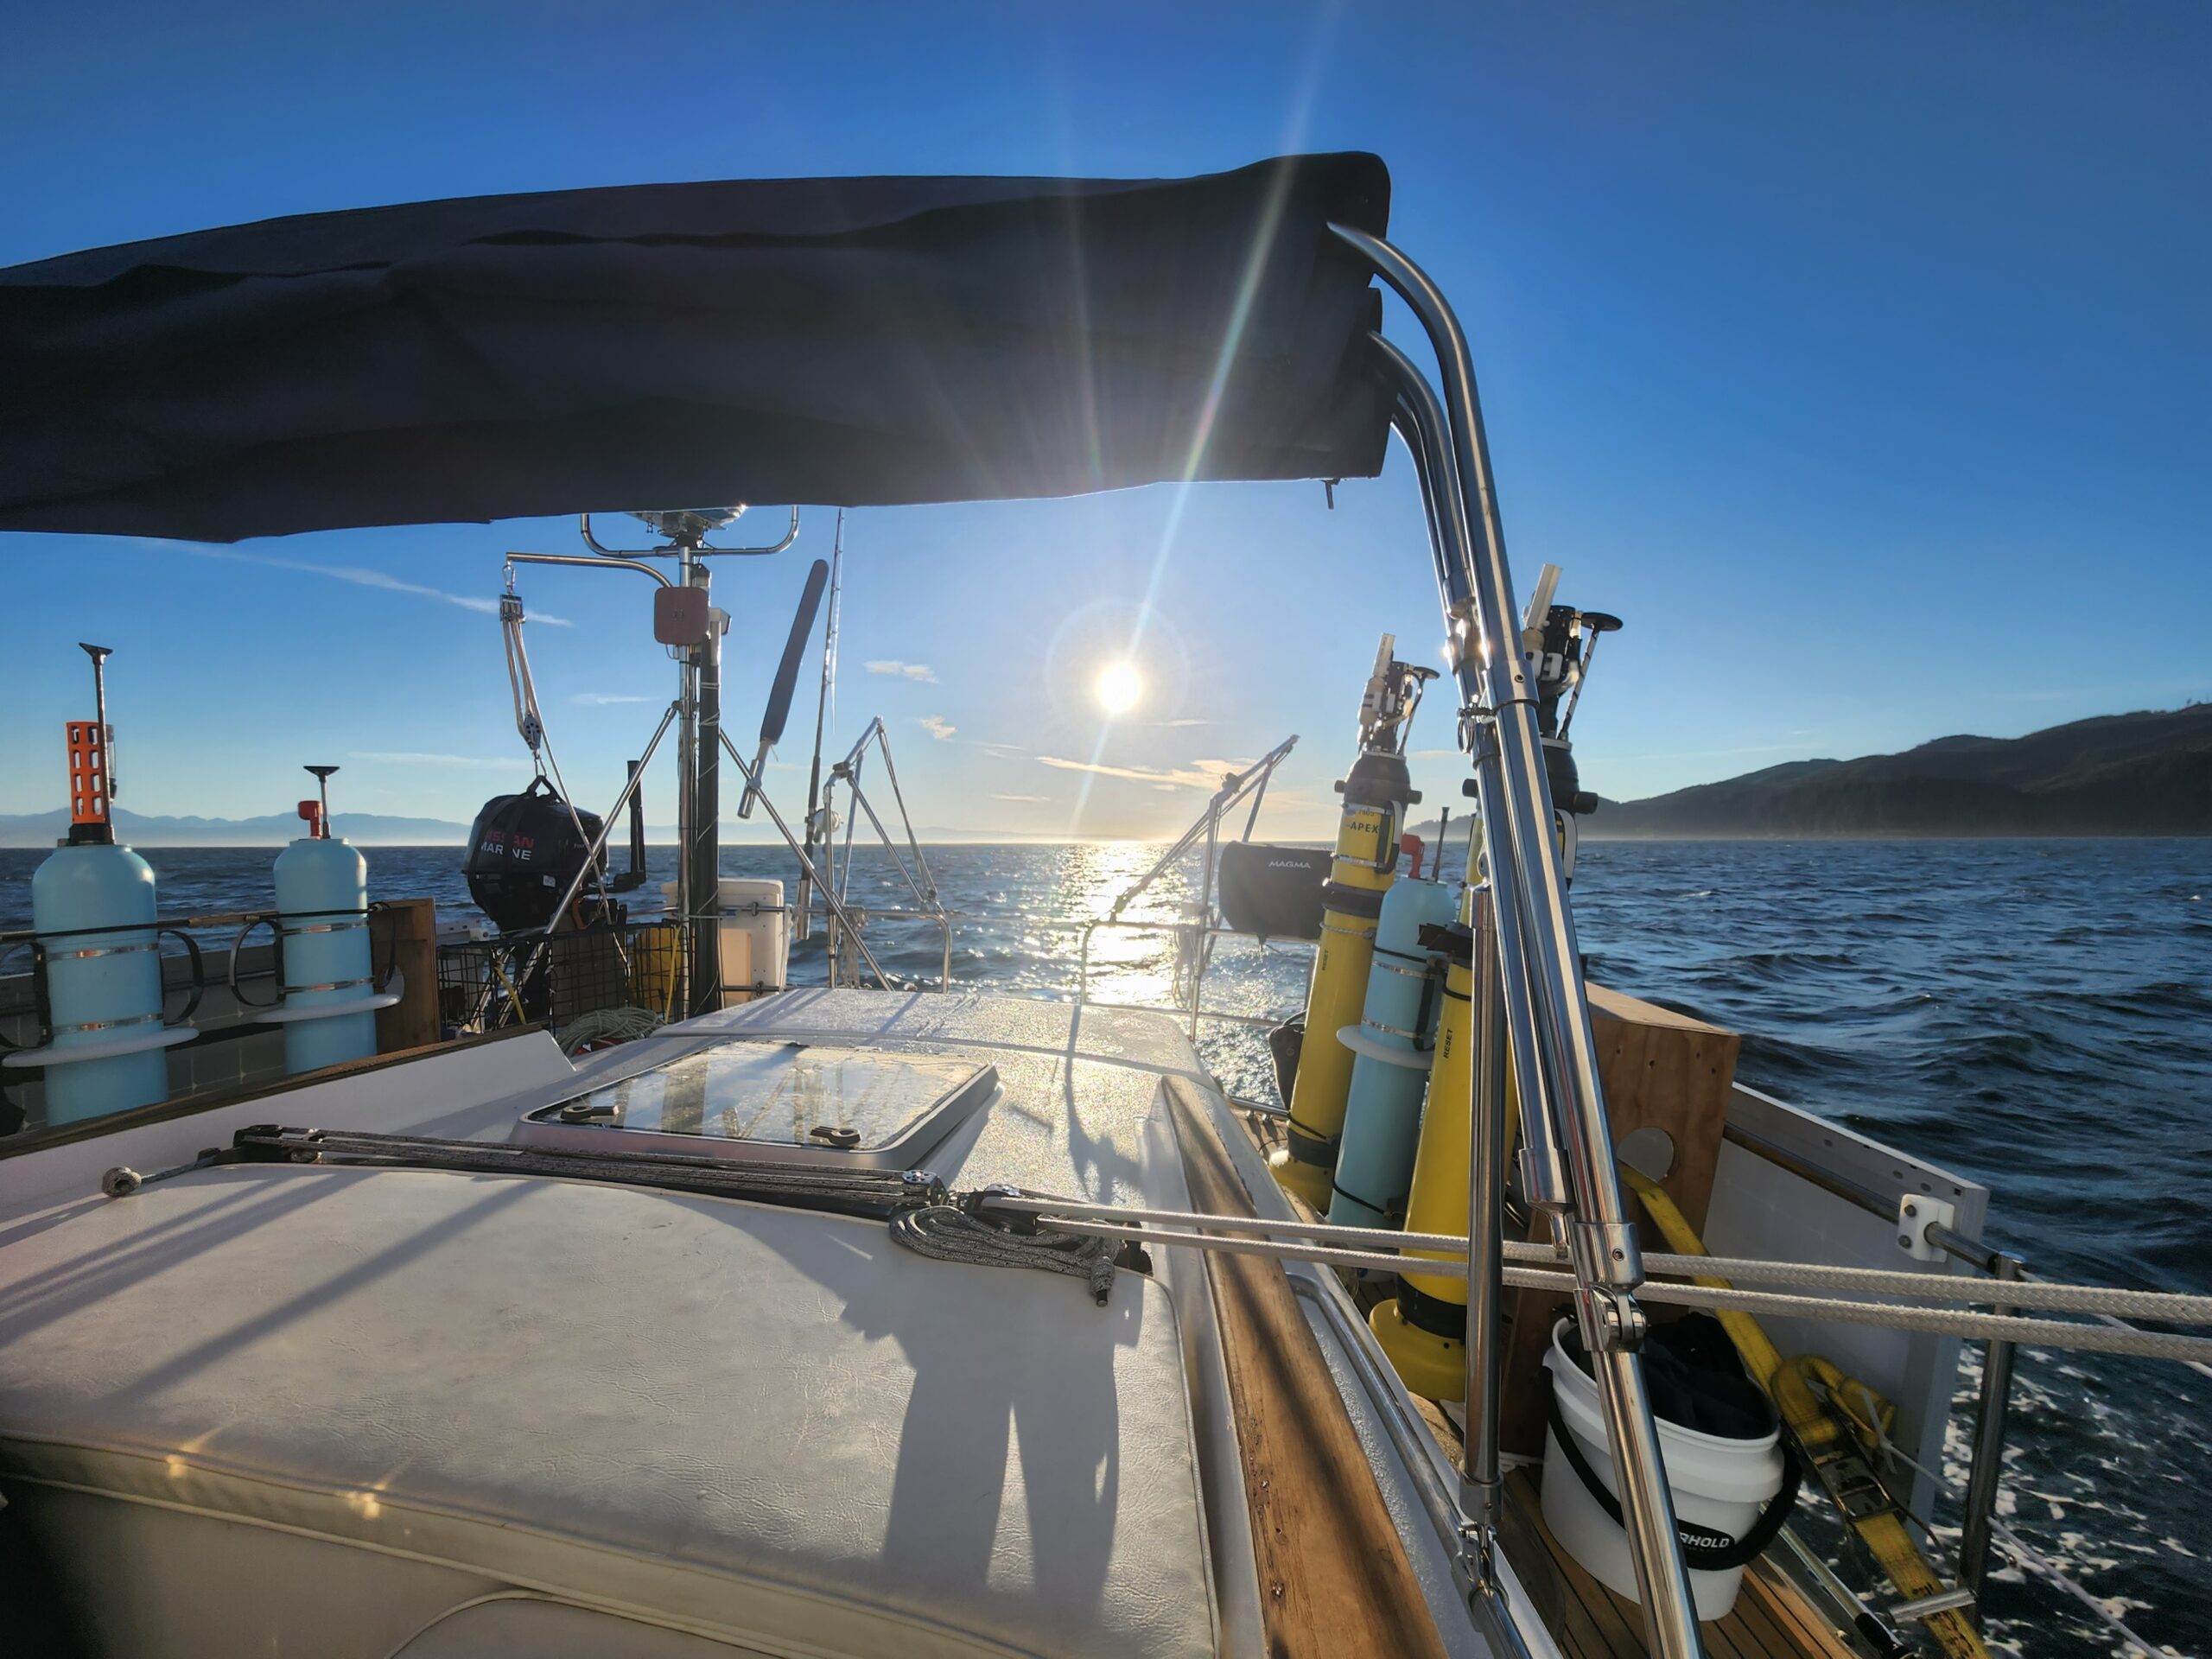 Sailing 100 miles off the Washington coast: doing science and catching fish